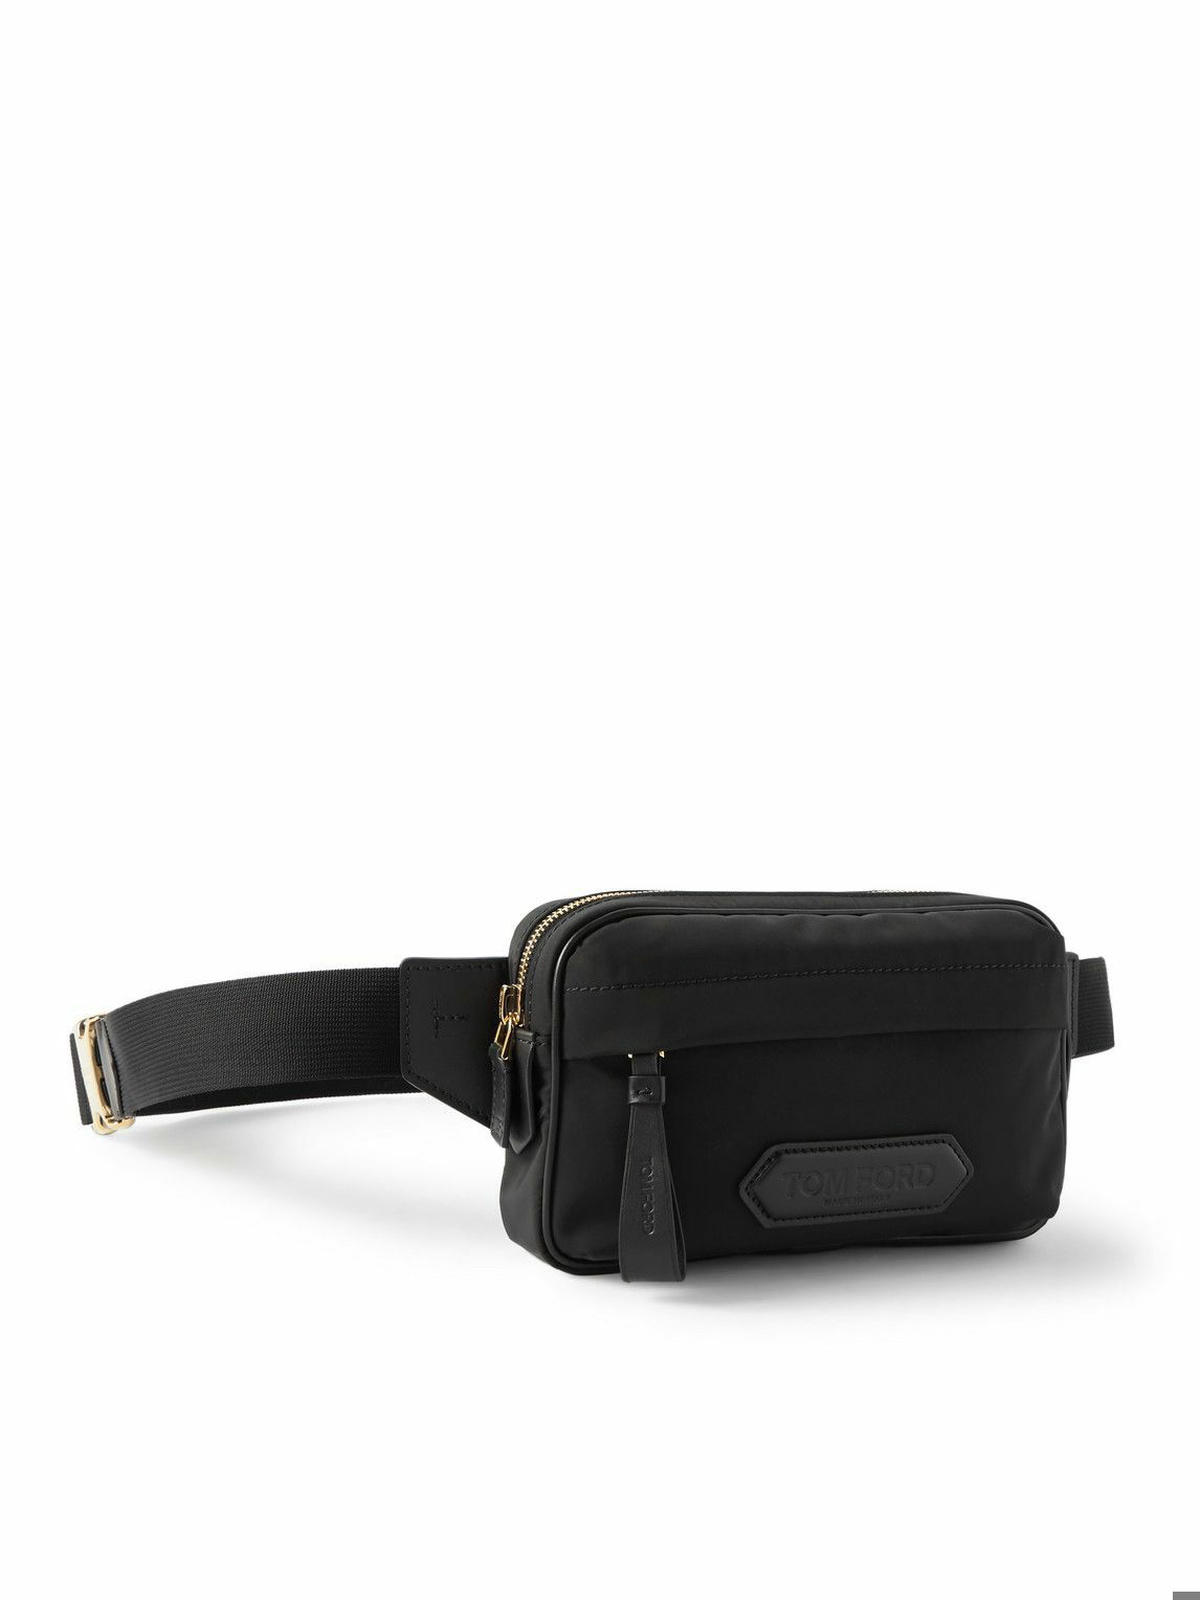 TOM FORD Leather-Trimmed Recycled Nylon Pouch for Men